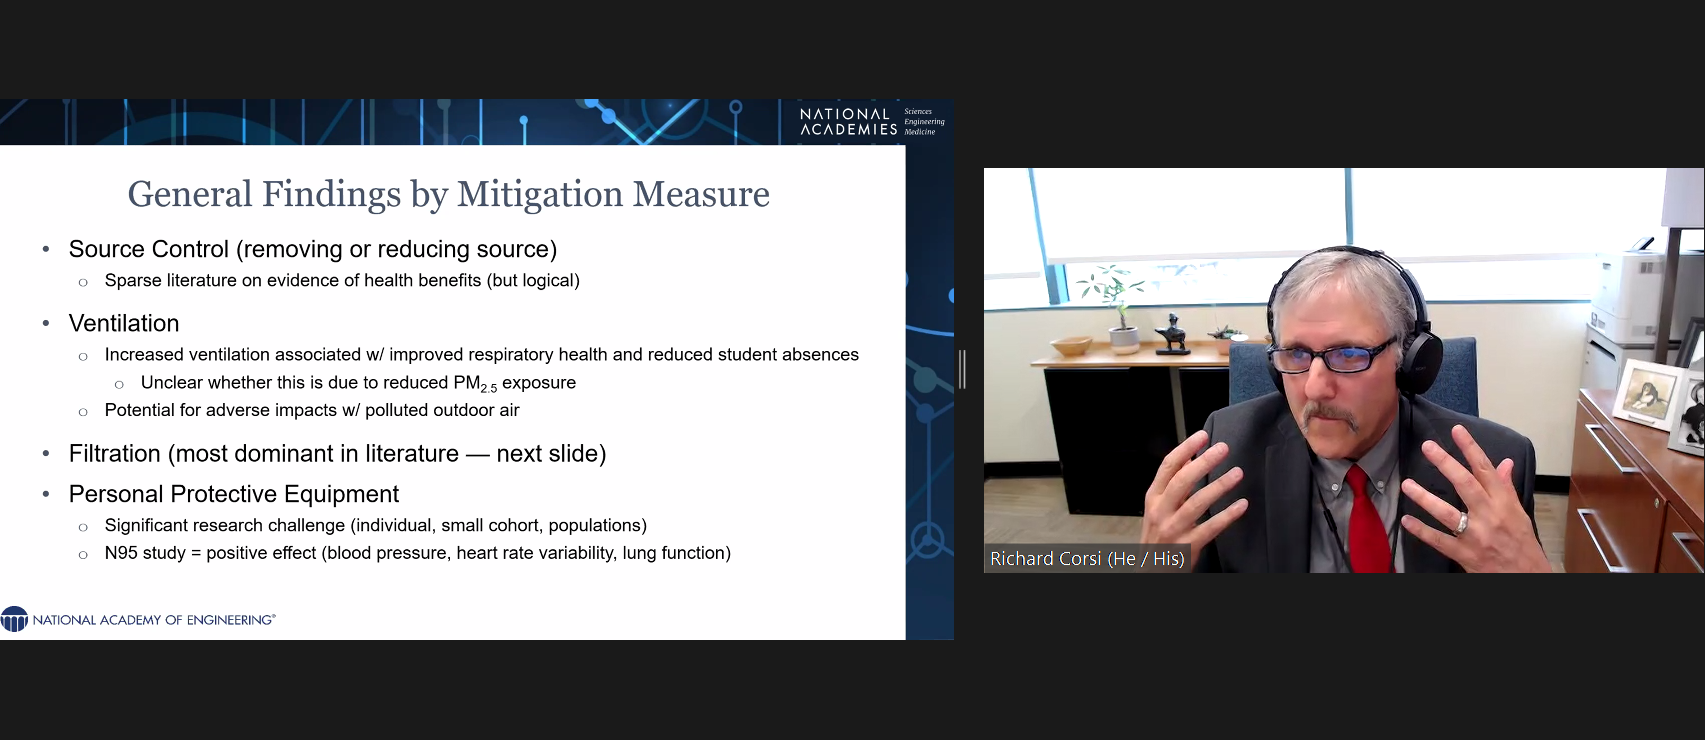 Screenshot of a slideshow on the left and Dean Richard Corsi on the right from an online webinar